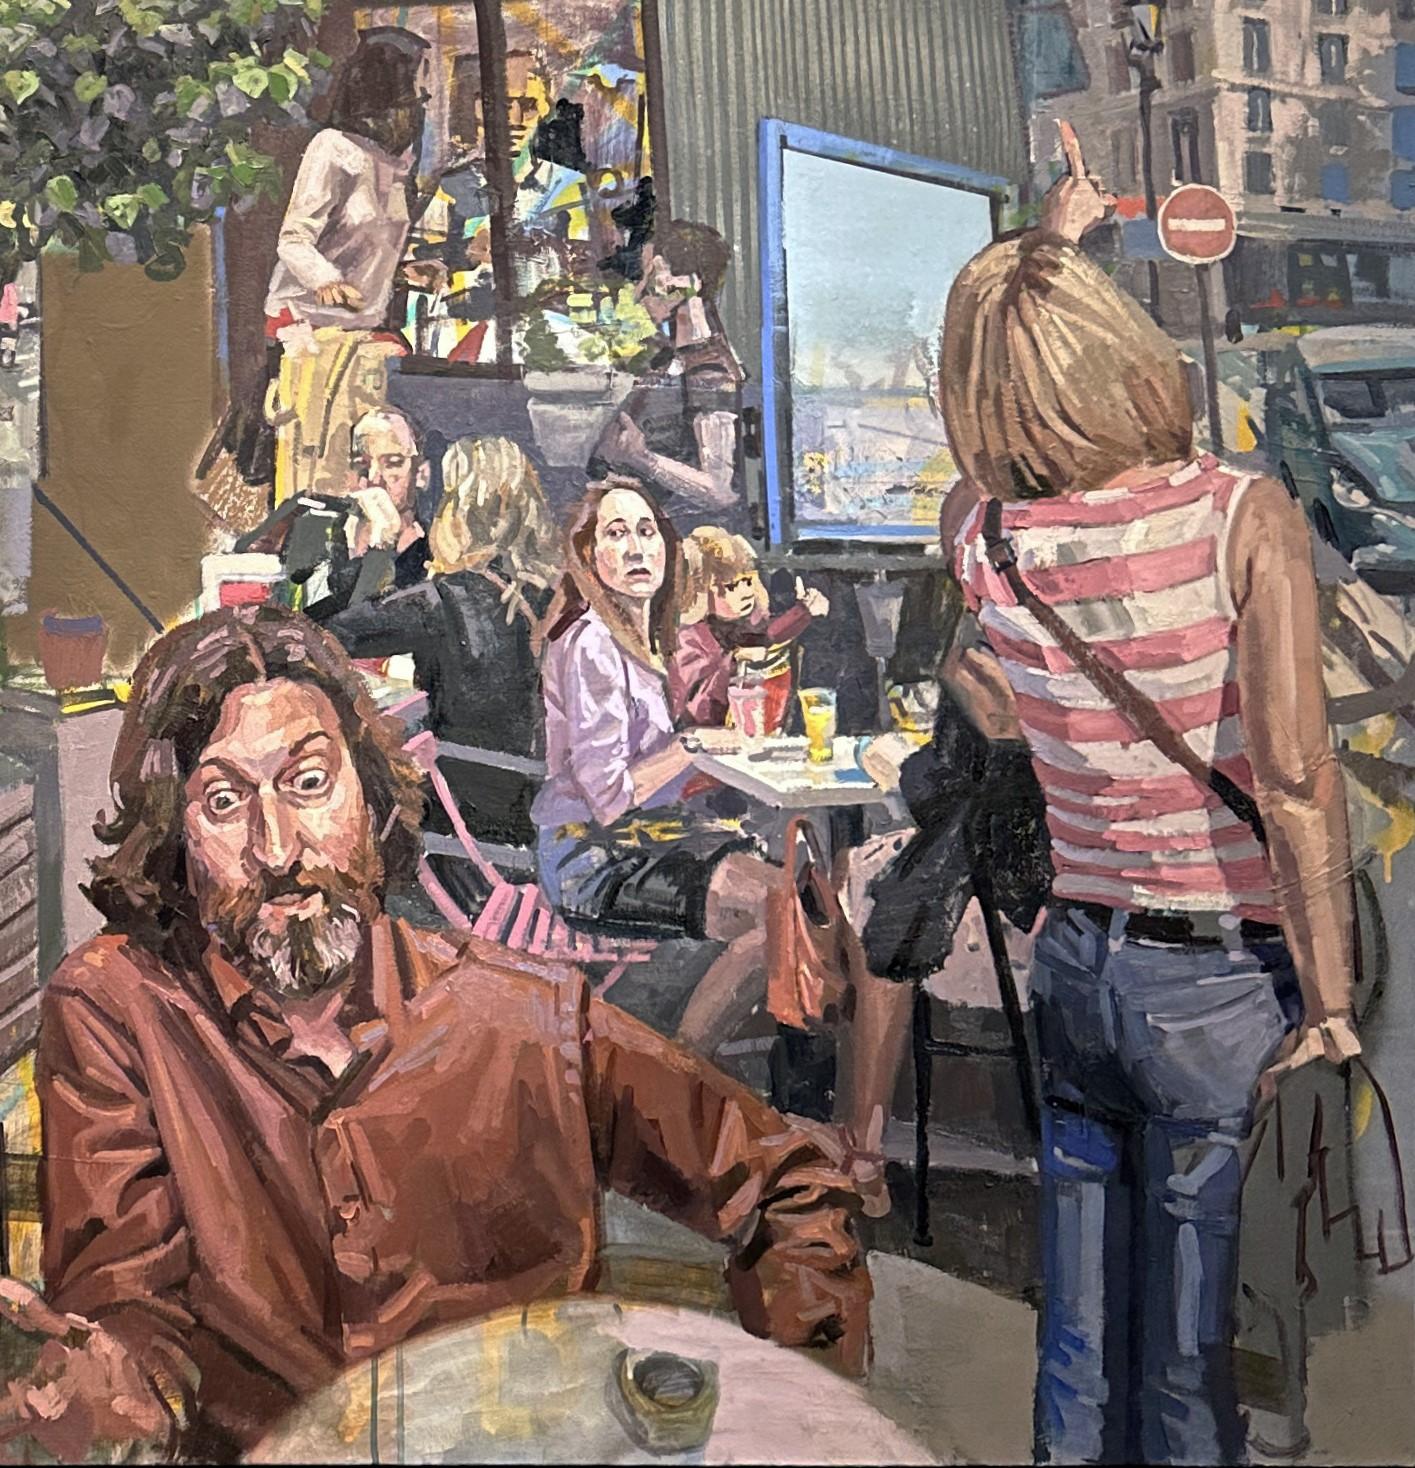 Untitled  - Surreal Chaotic Urban Café Scene, Original Oil Painting For Sale 1